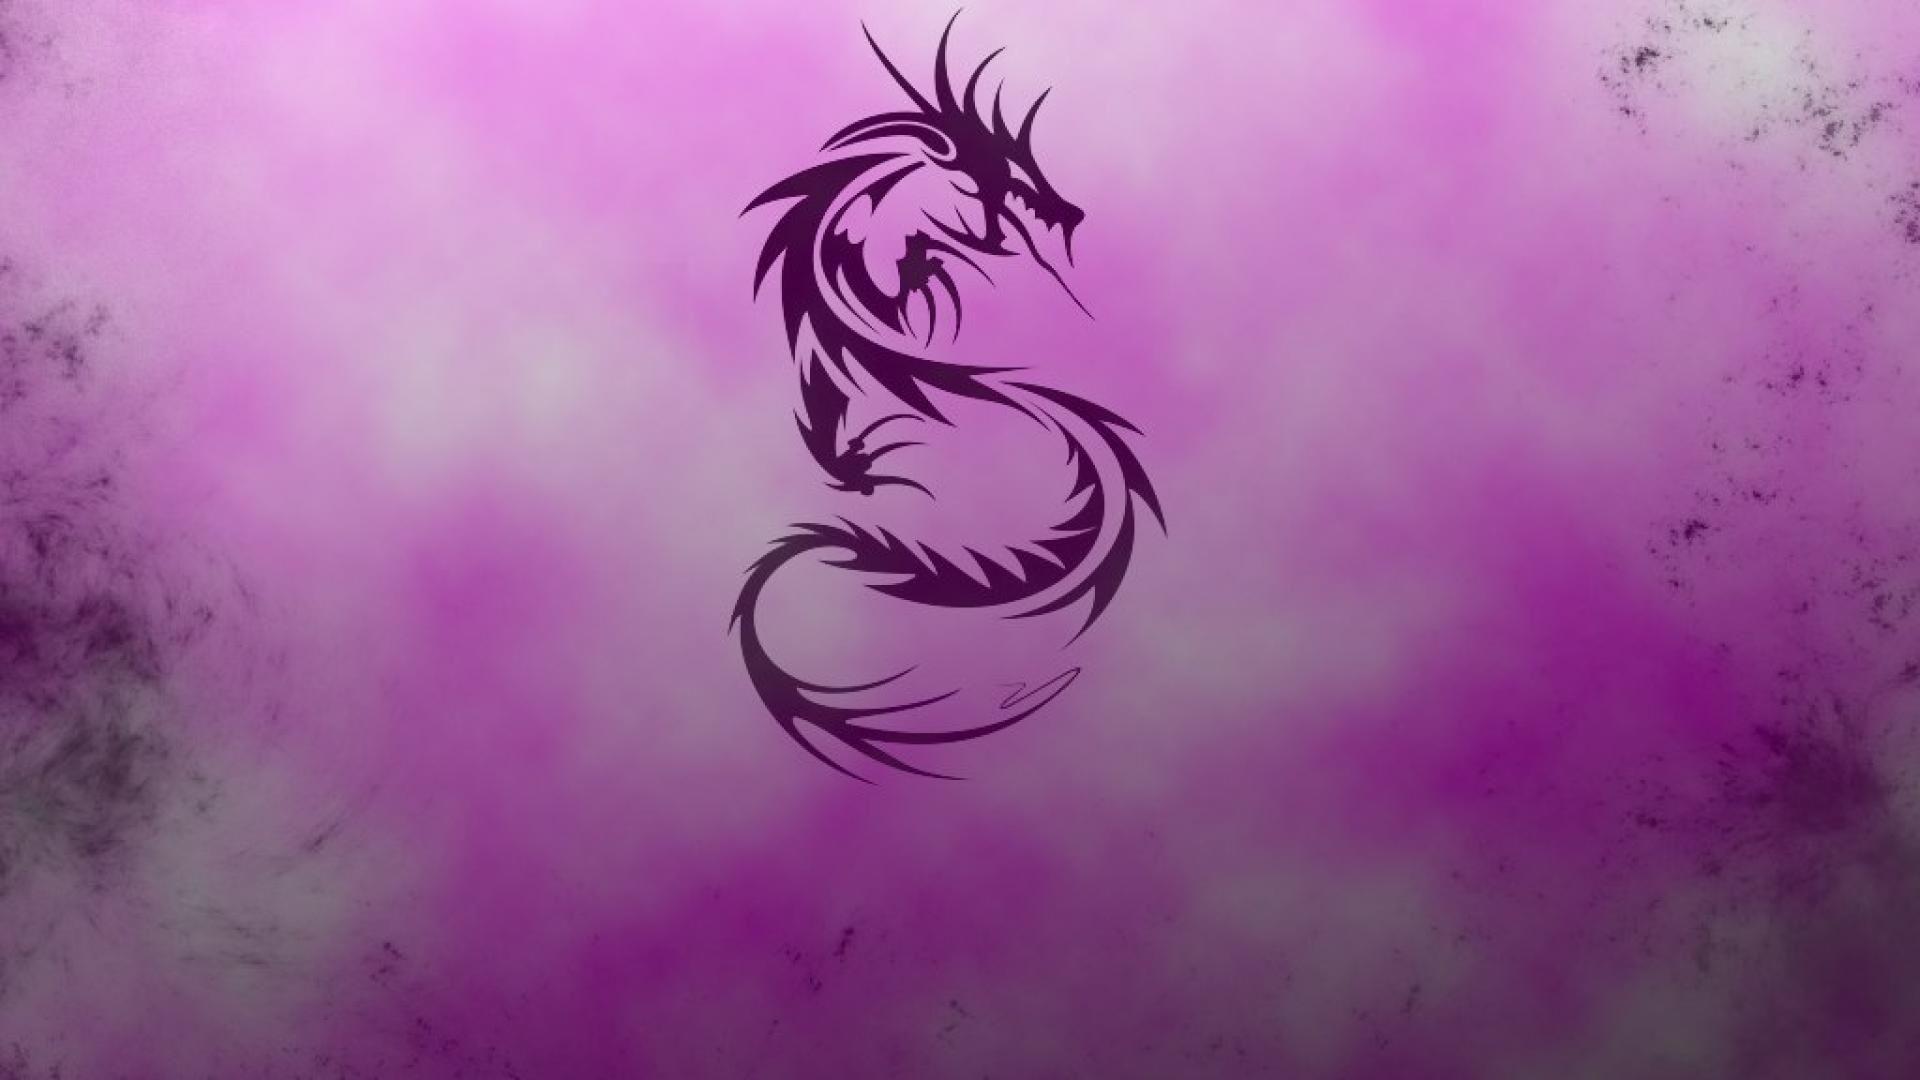 Best Free Pink and Purple Dragon Wallpaper